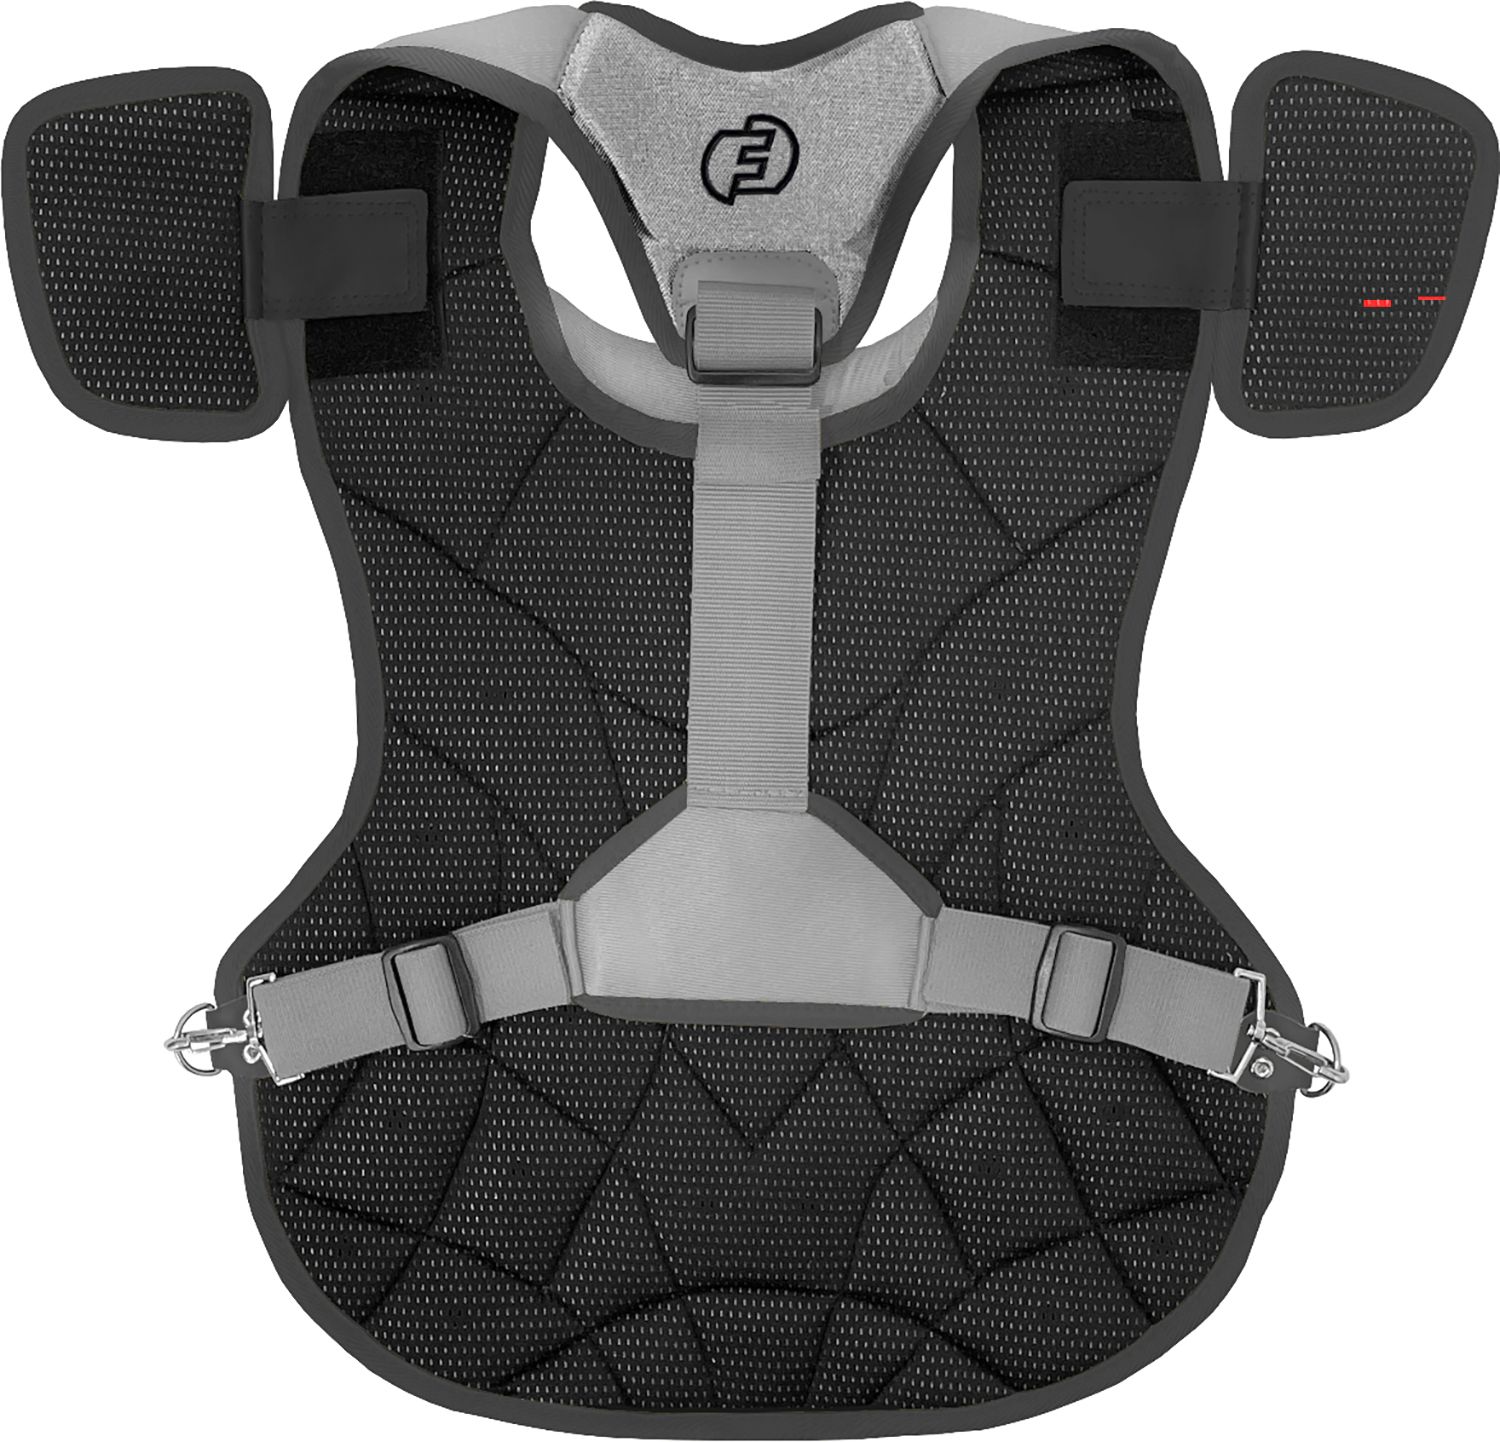 Force3 Pro Gear Adult Catcher's Set w/ Traditional Defender Mask